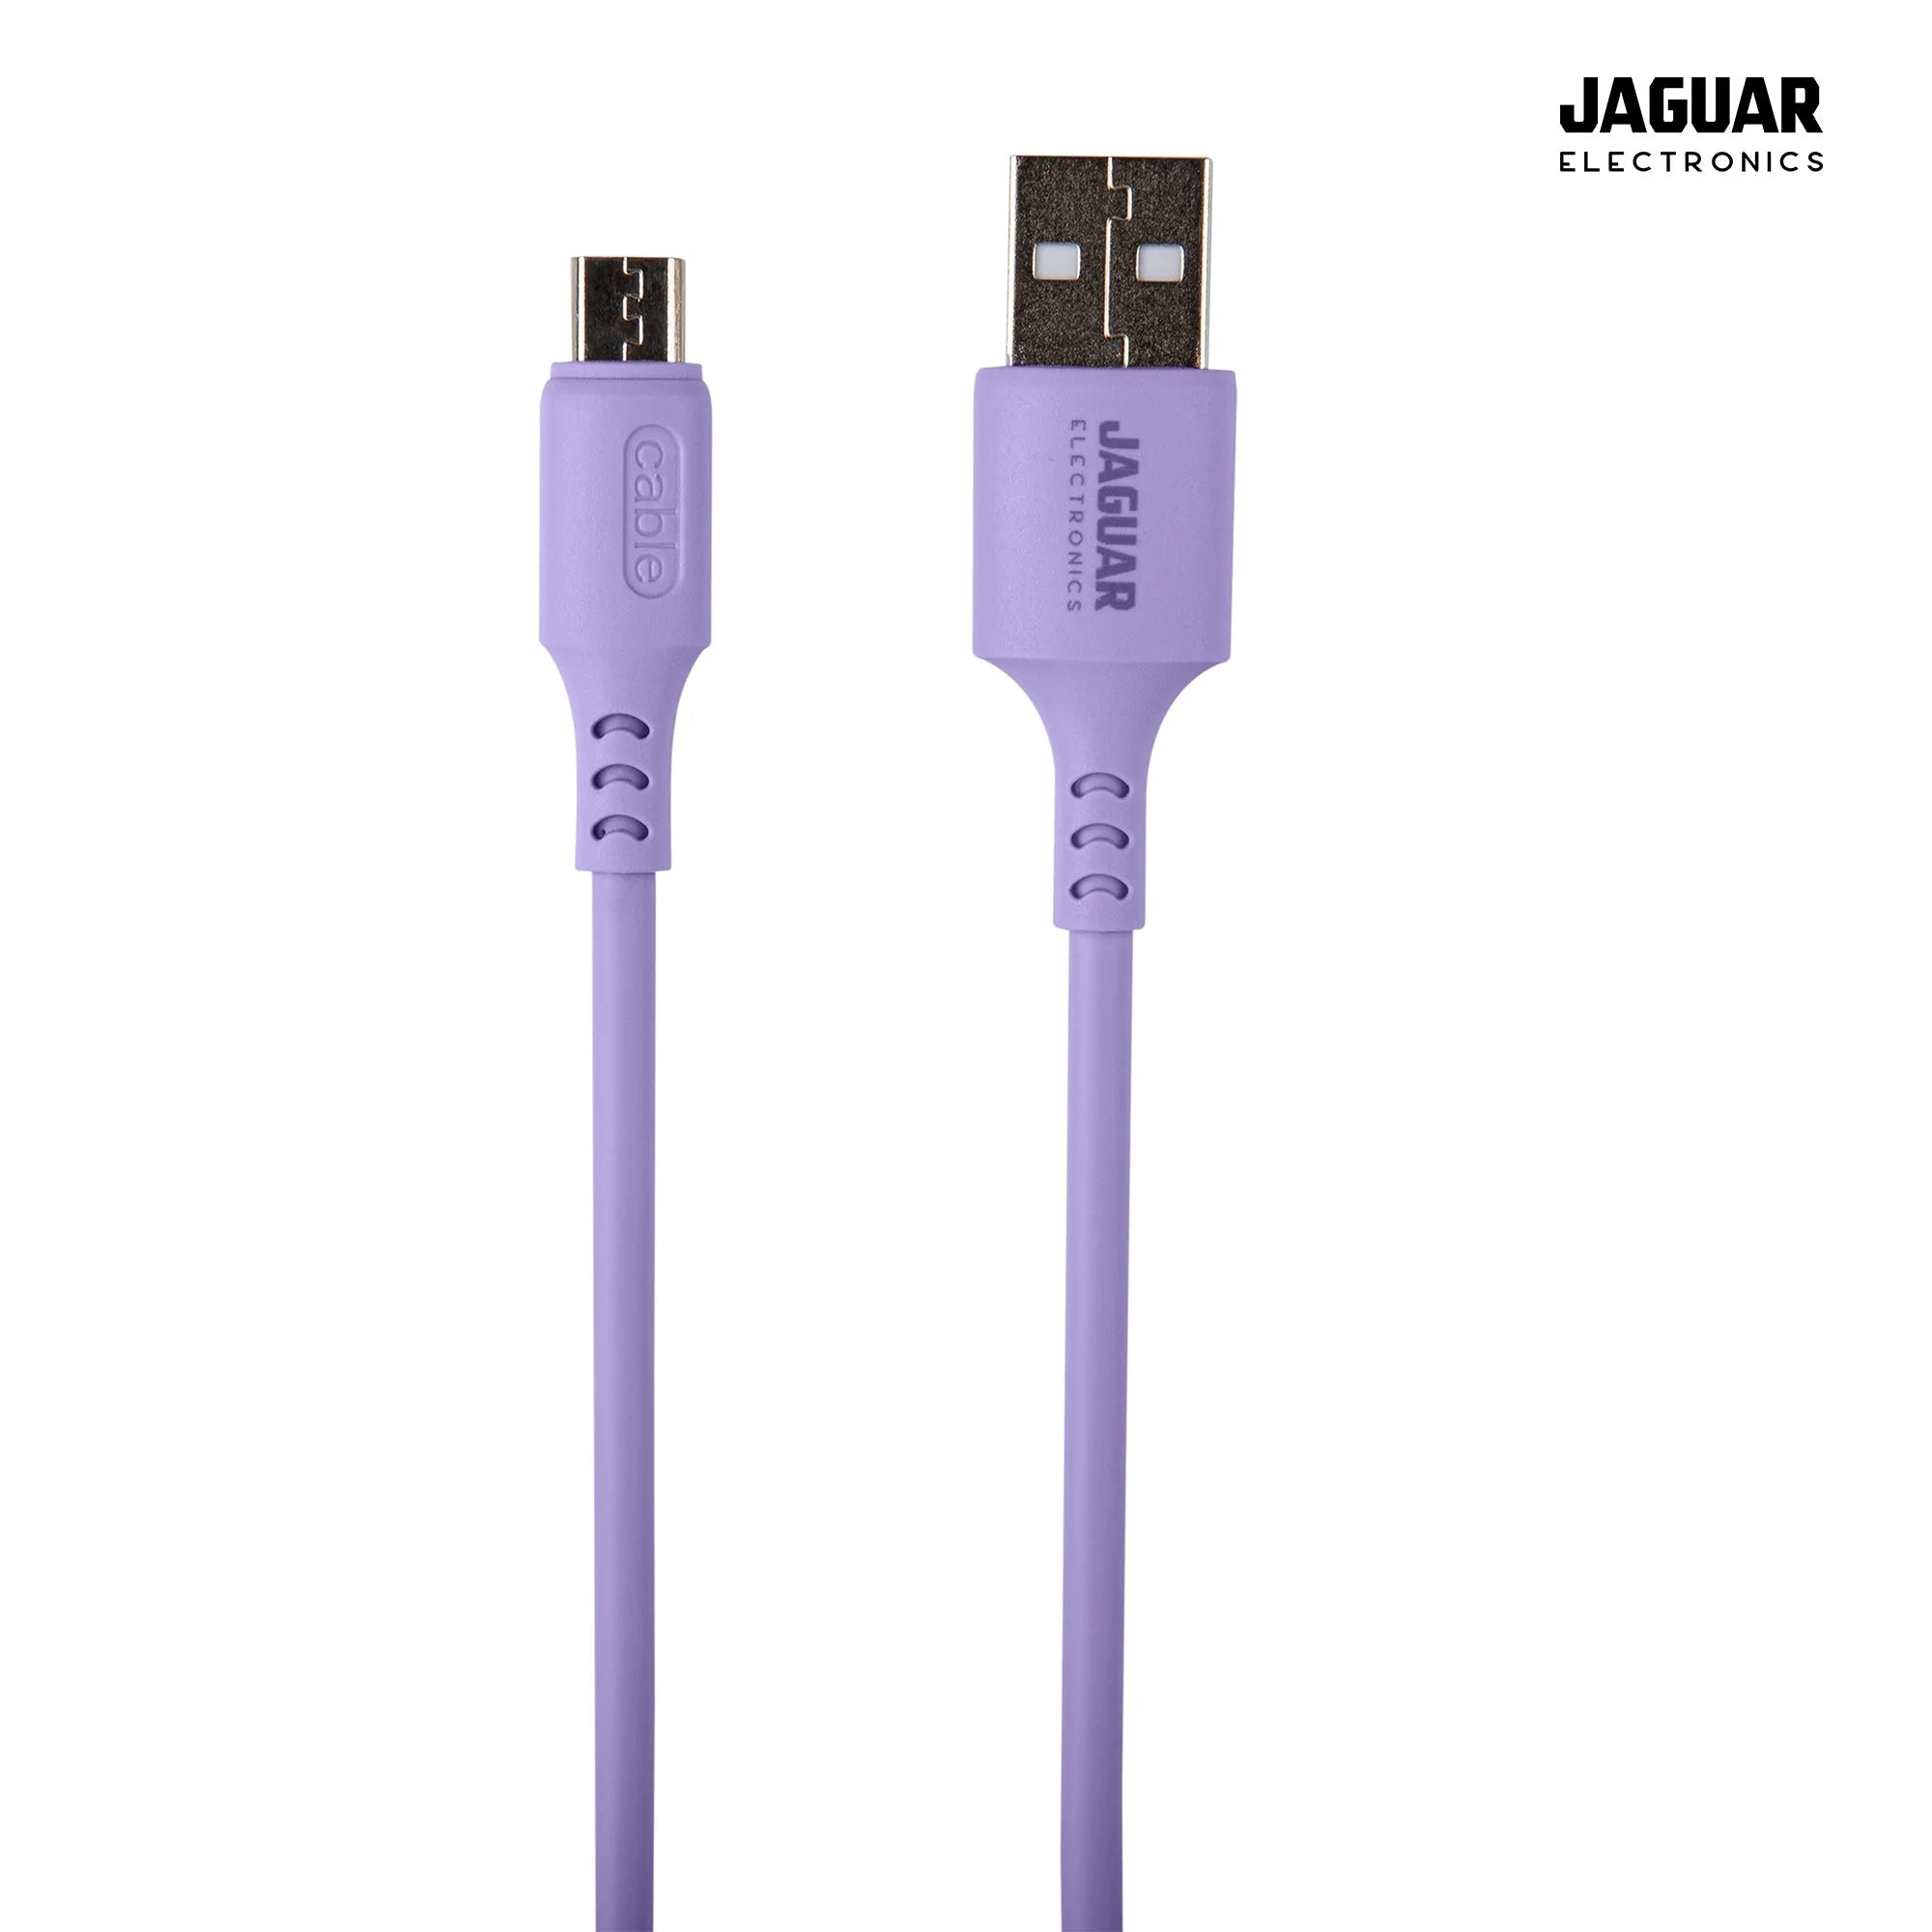 Jaguar Electronics CG27 2.4A 1 Meter Fast Charging Data Ultra Silicone Cable Micro USB